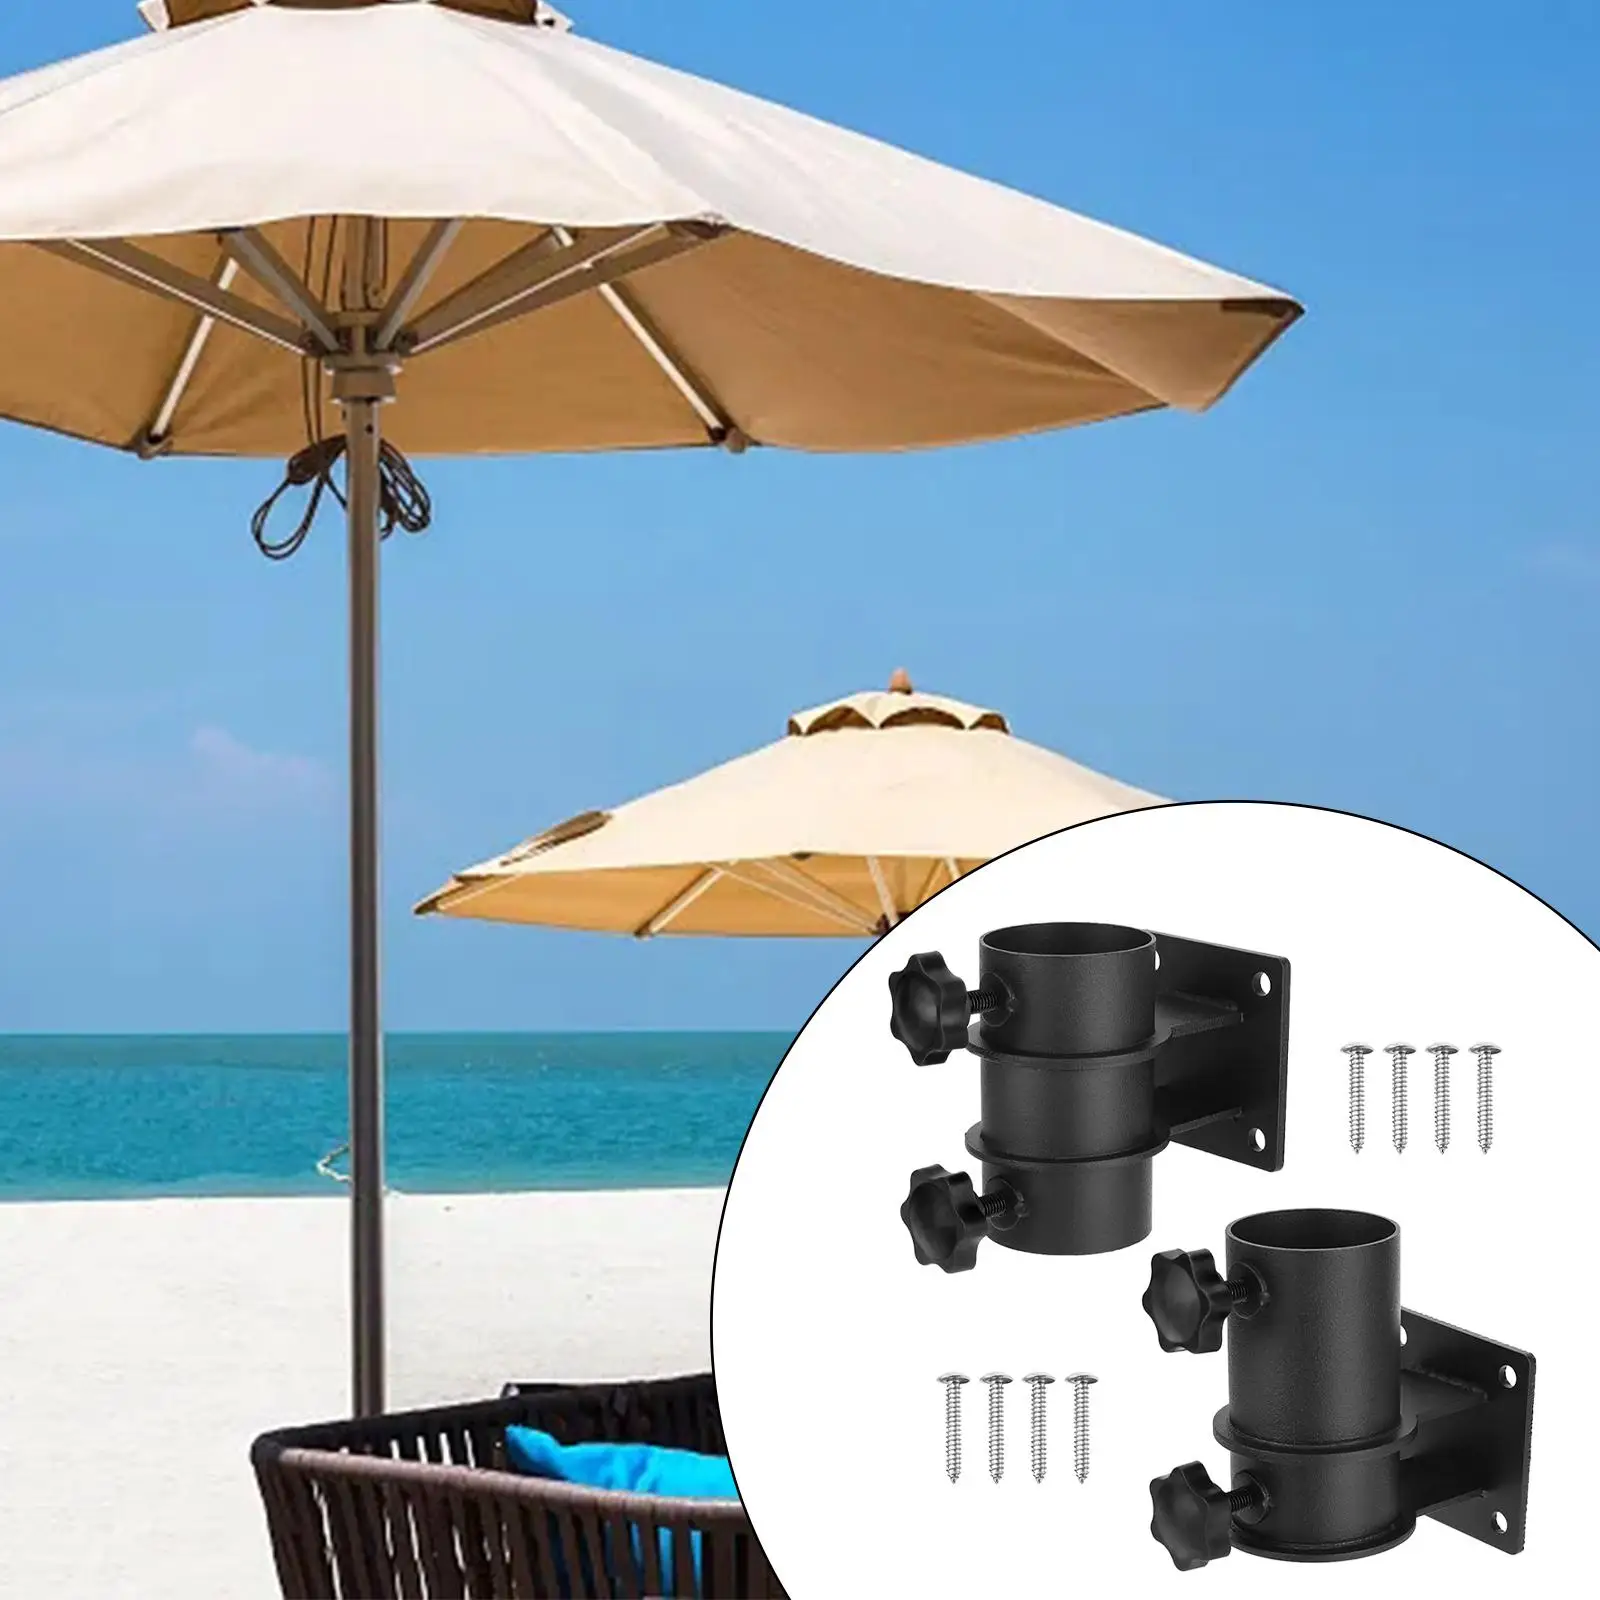 Umbrella Base Stand Fits 30mm-50mm Pole Sun Shelter Hand Knob Patio Umbrella Stand Mount for Lawn Backyard Courtyard Attachments